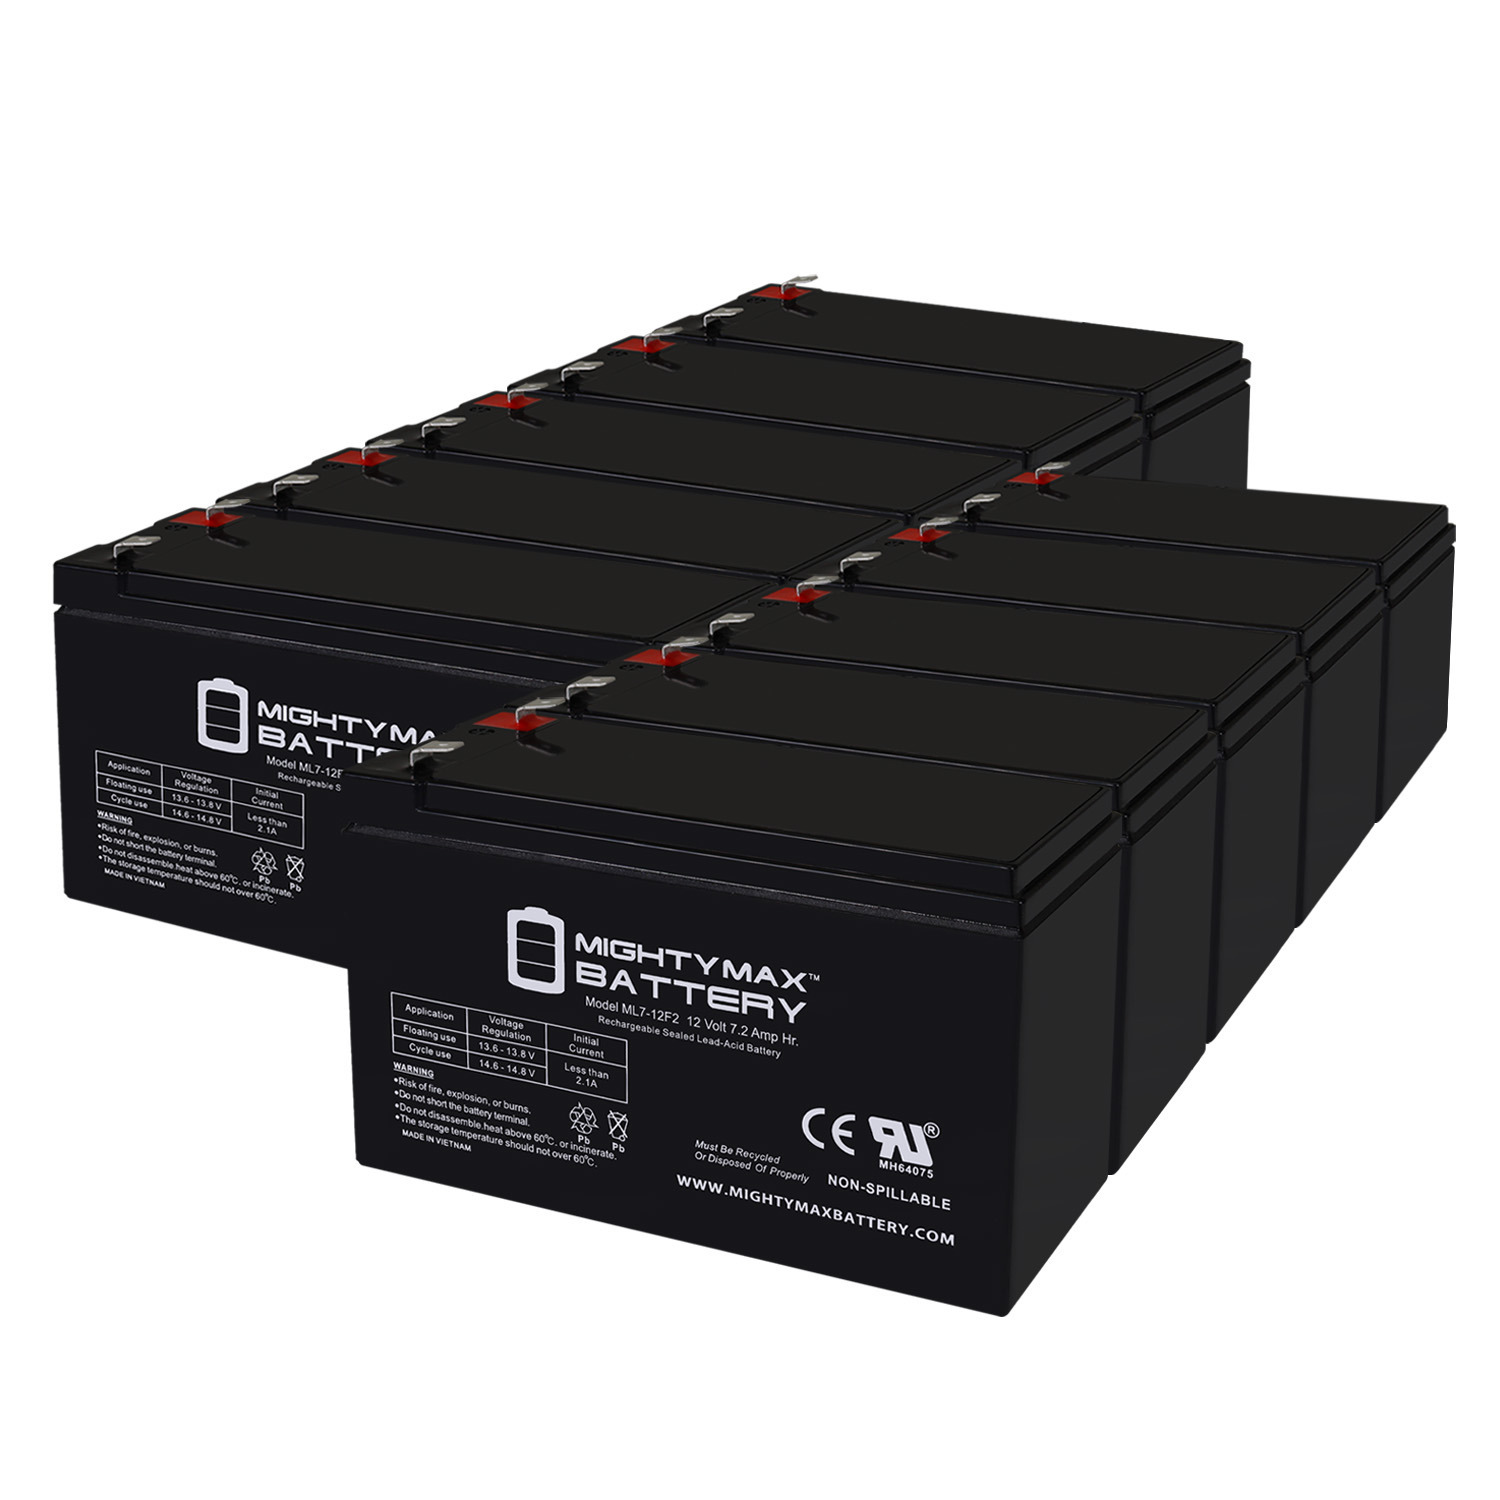 12V 7Ah F2 Replacement Battery for City Mantis Scooter - 10 Pack